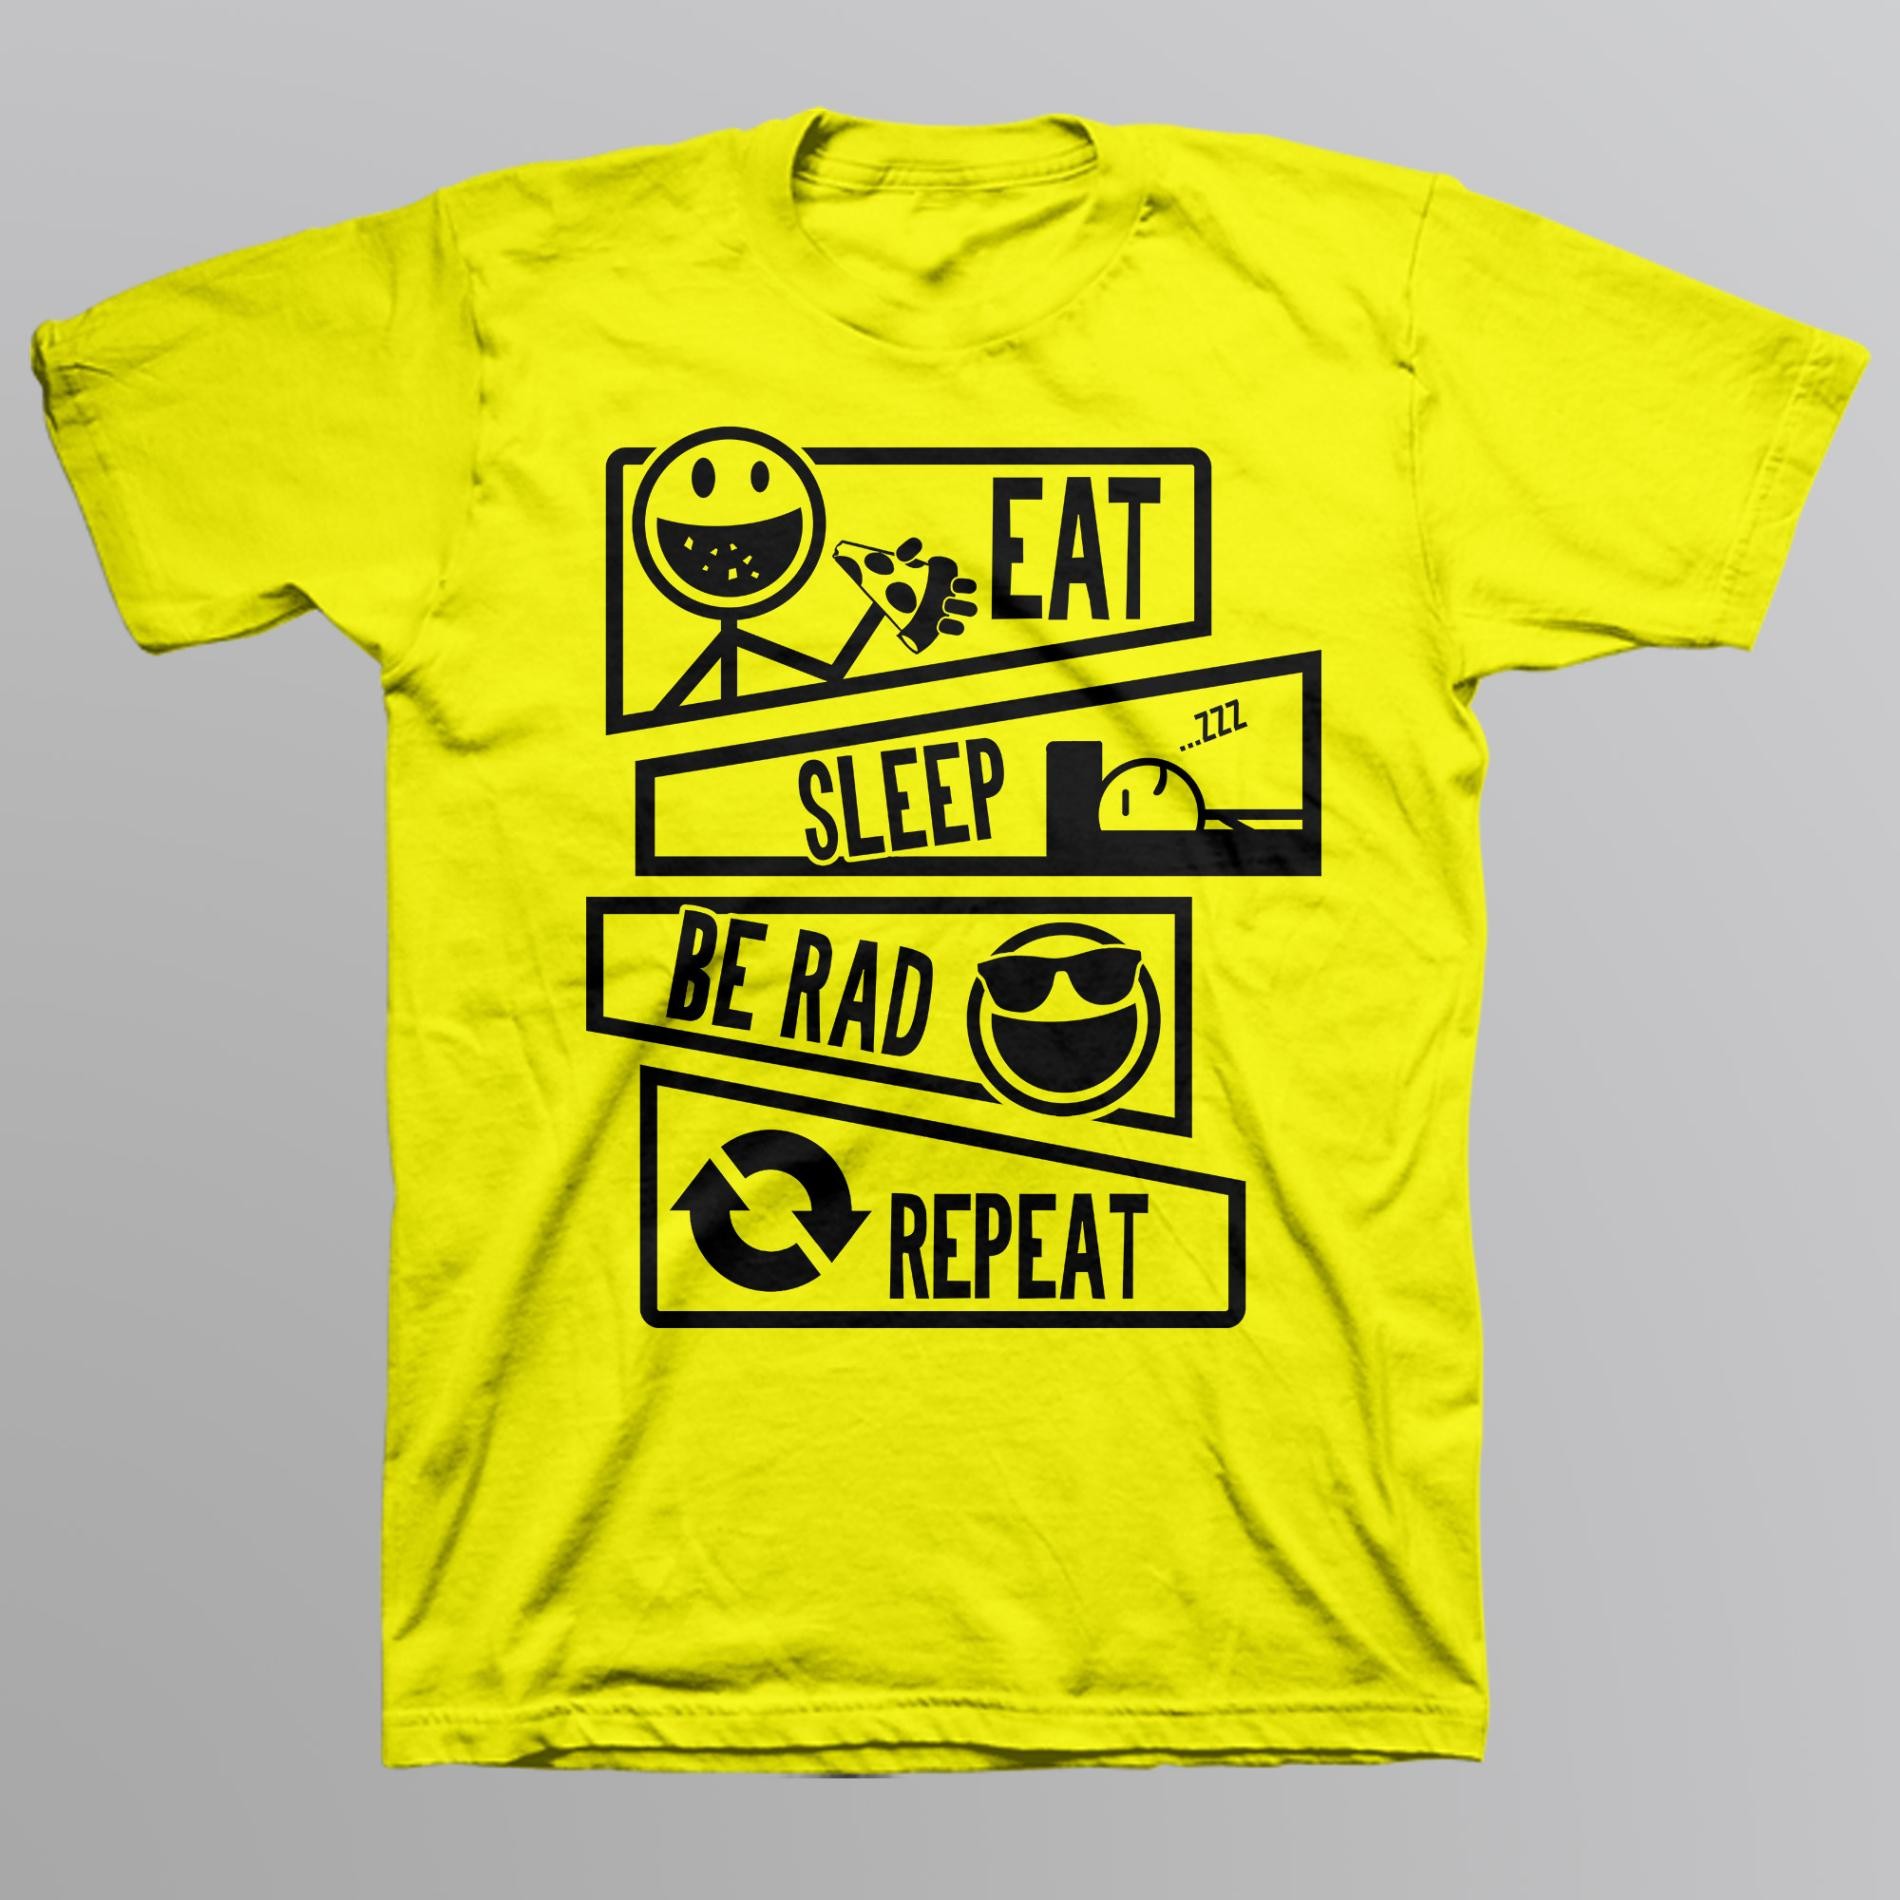 Route 66 Boy's Graphic T-Shirt - Eat  Sleep  Be Rad